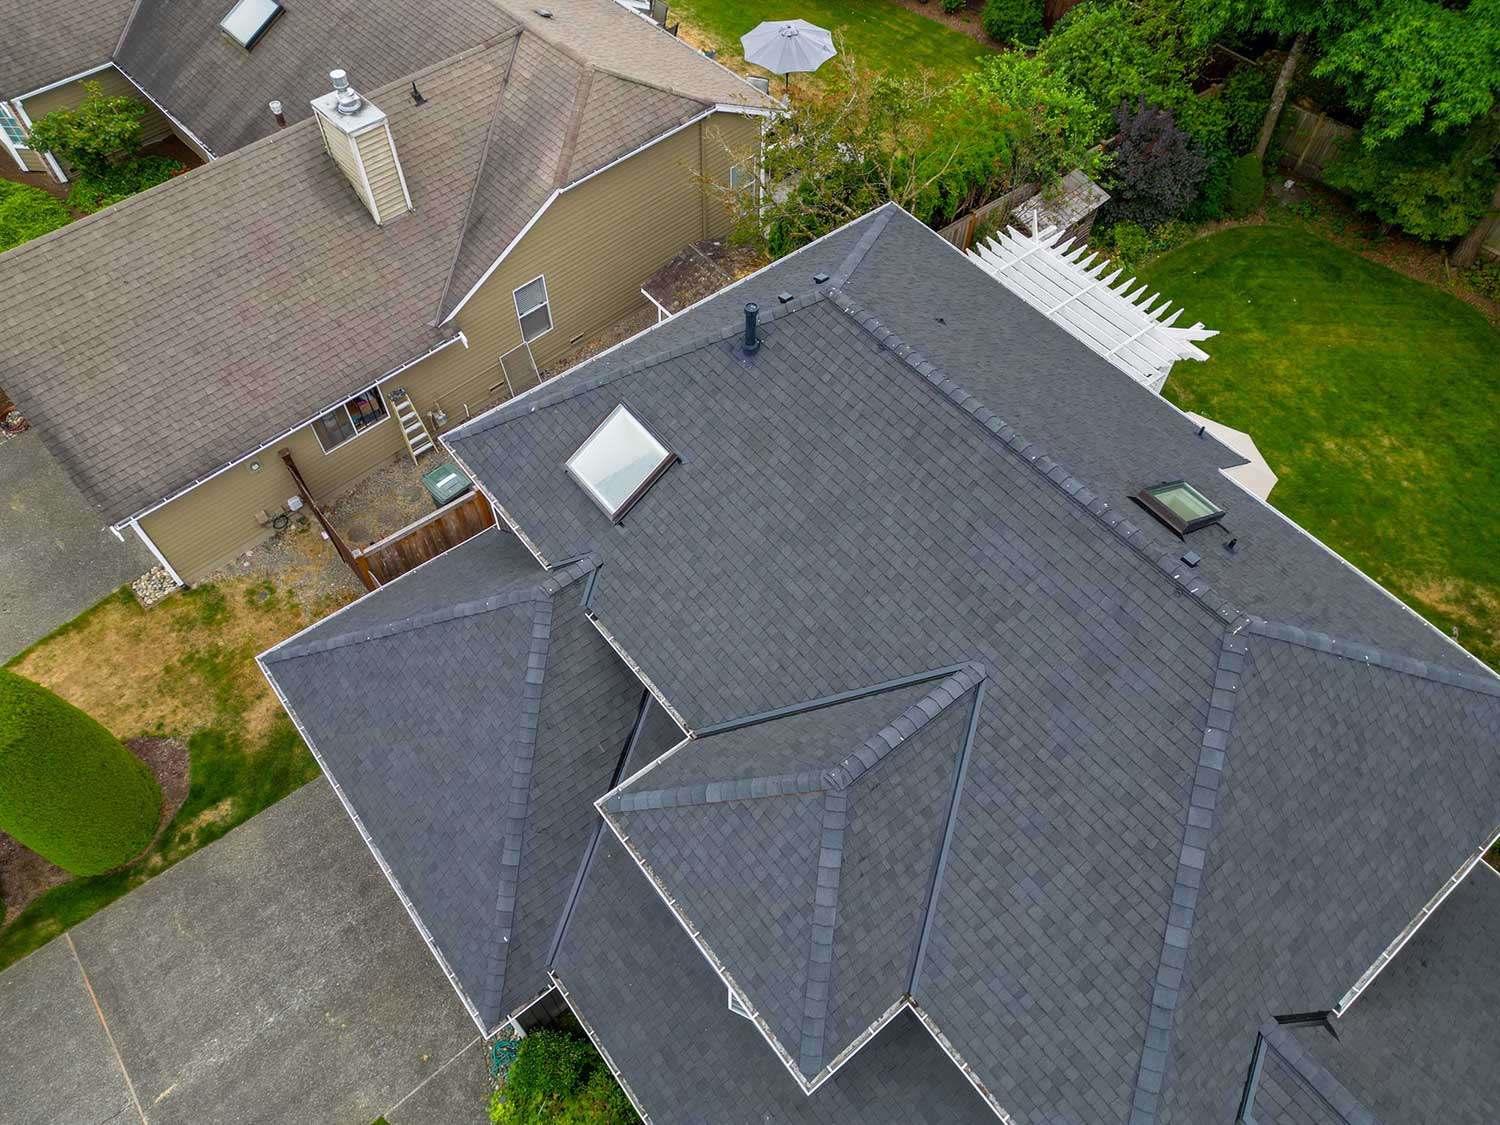 Composite Shingles Roof, Bothell, Washington - Close up of skylights and roof details